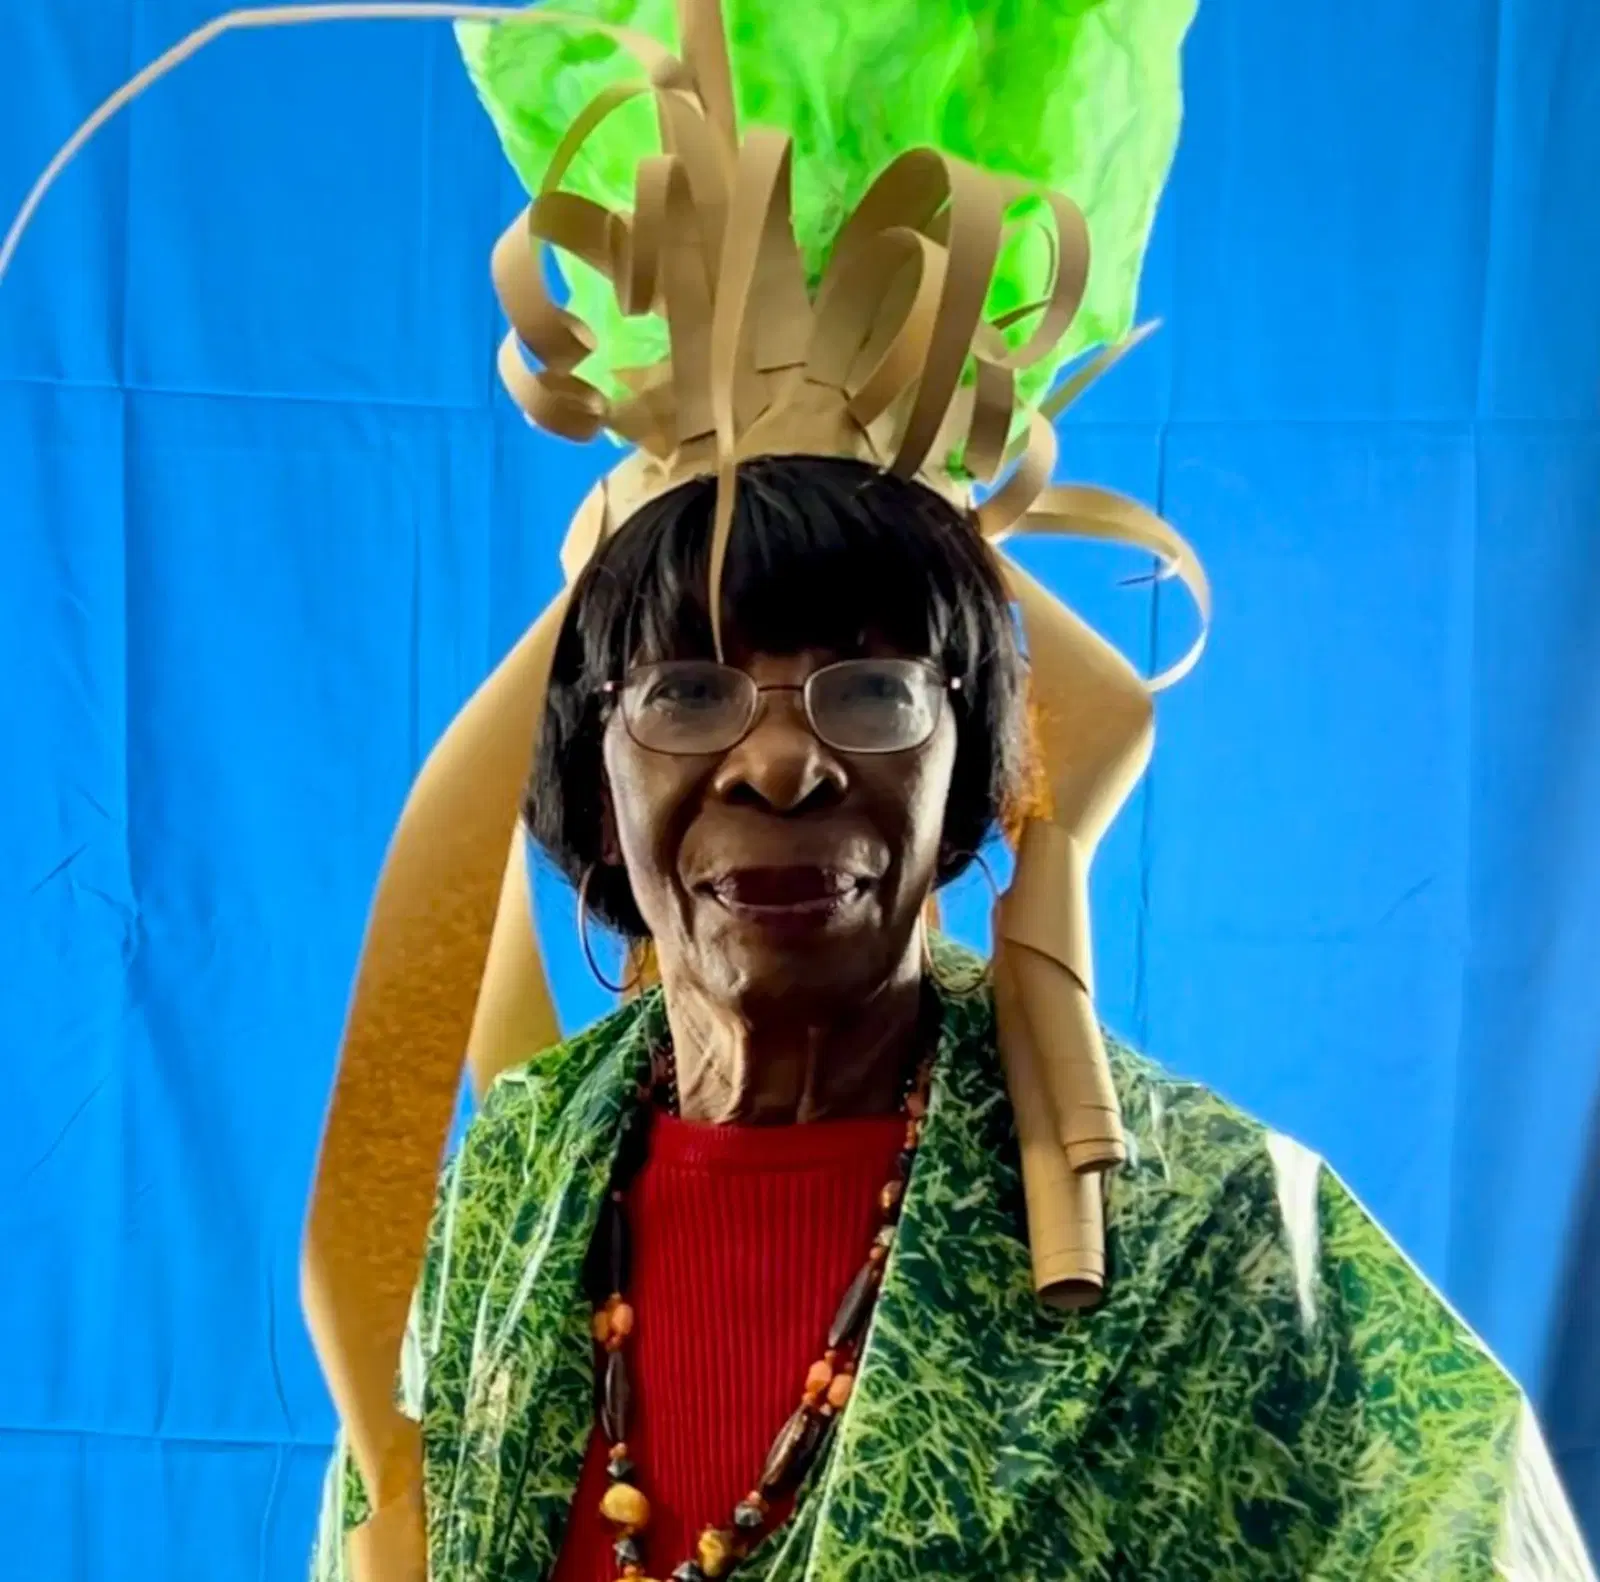 A joyful person wearing a whimsical headpiece made of cardboard and paper crafted to look like foliage and plants, with a bright blue background setting off their cheerful demeanor.